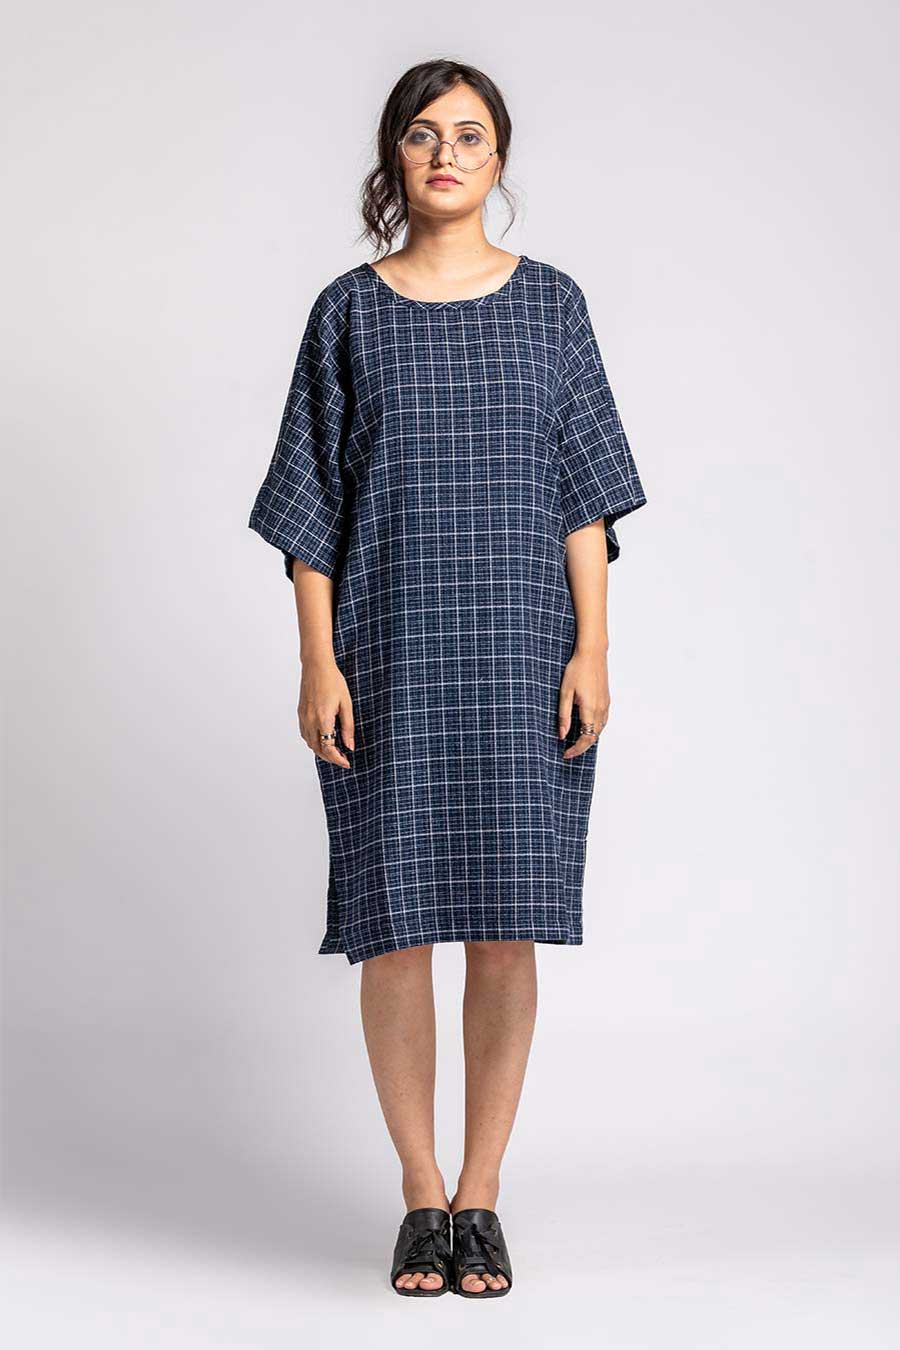 Idle Noon Checkered Blue Dress